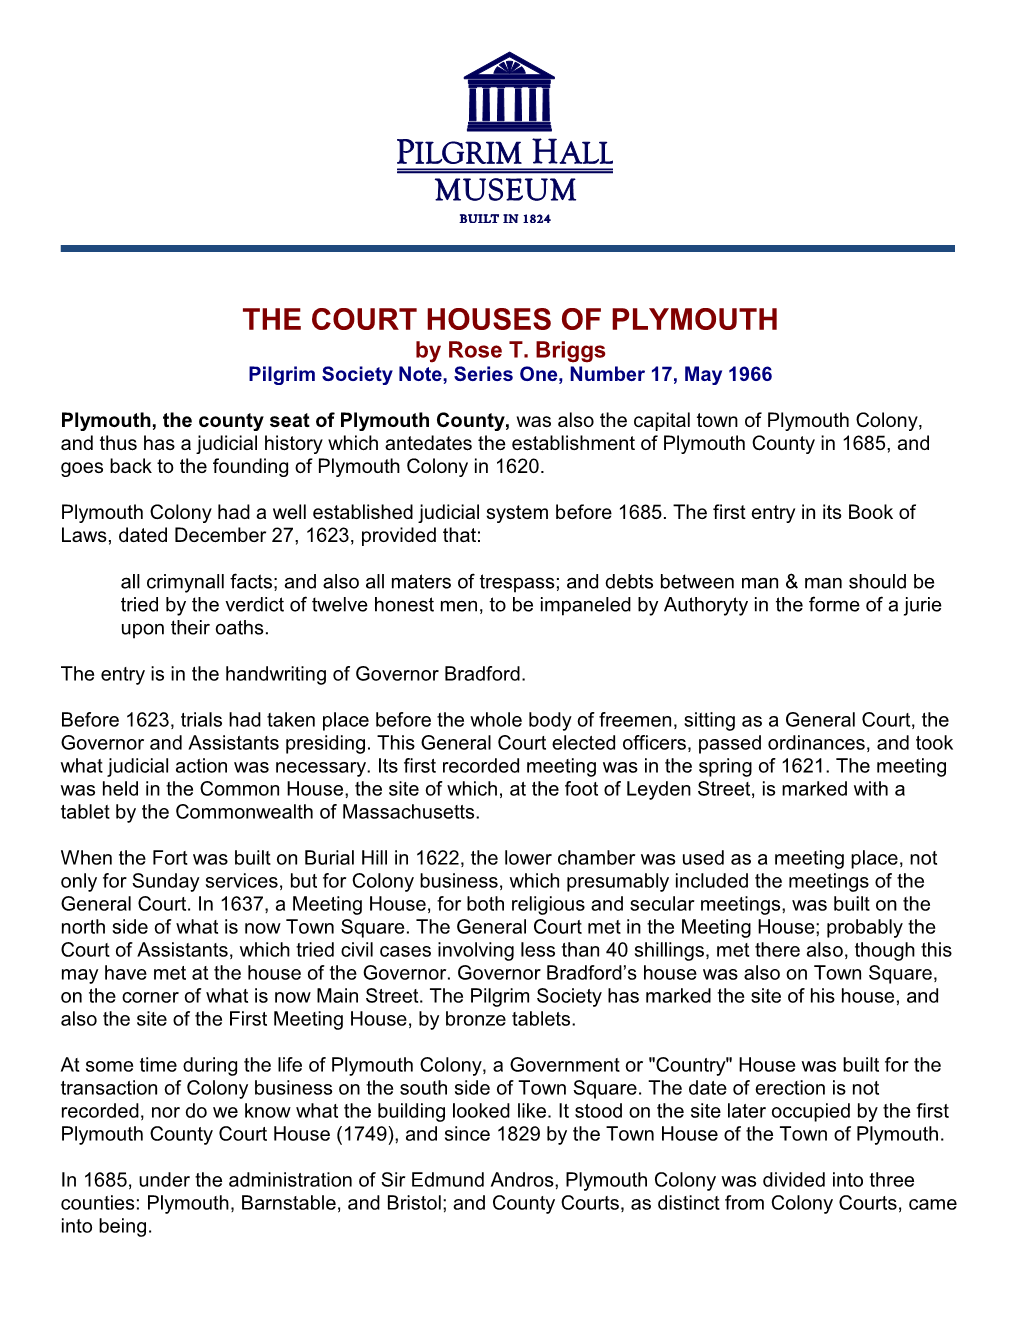 THE COURT HOUSES of PLYMOUTH by Rose T